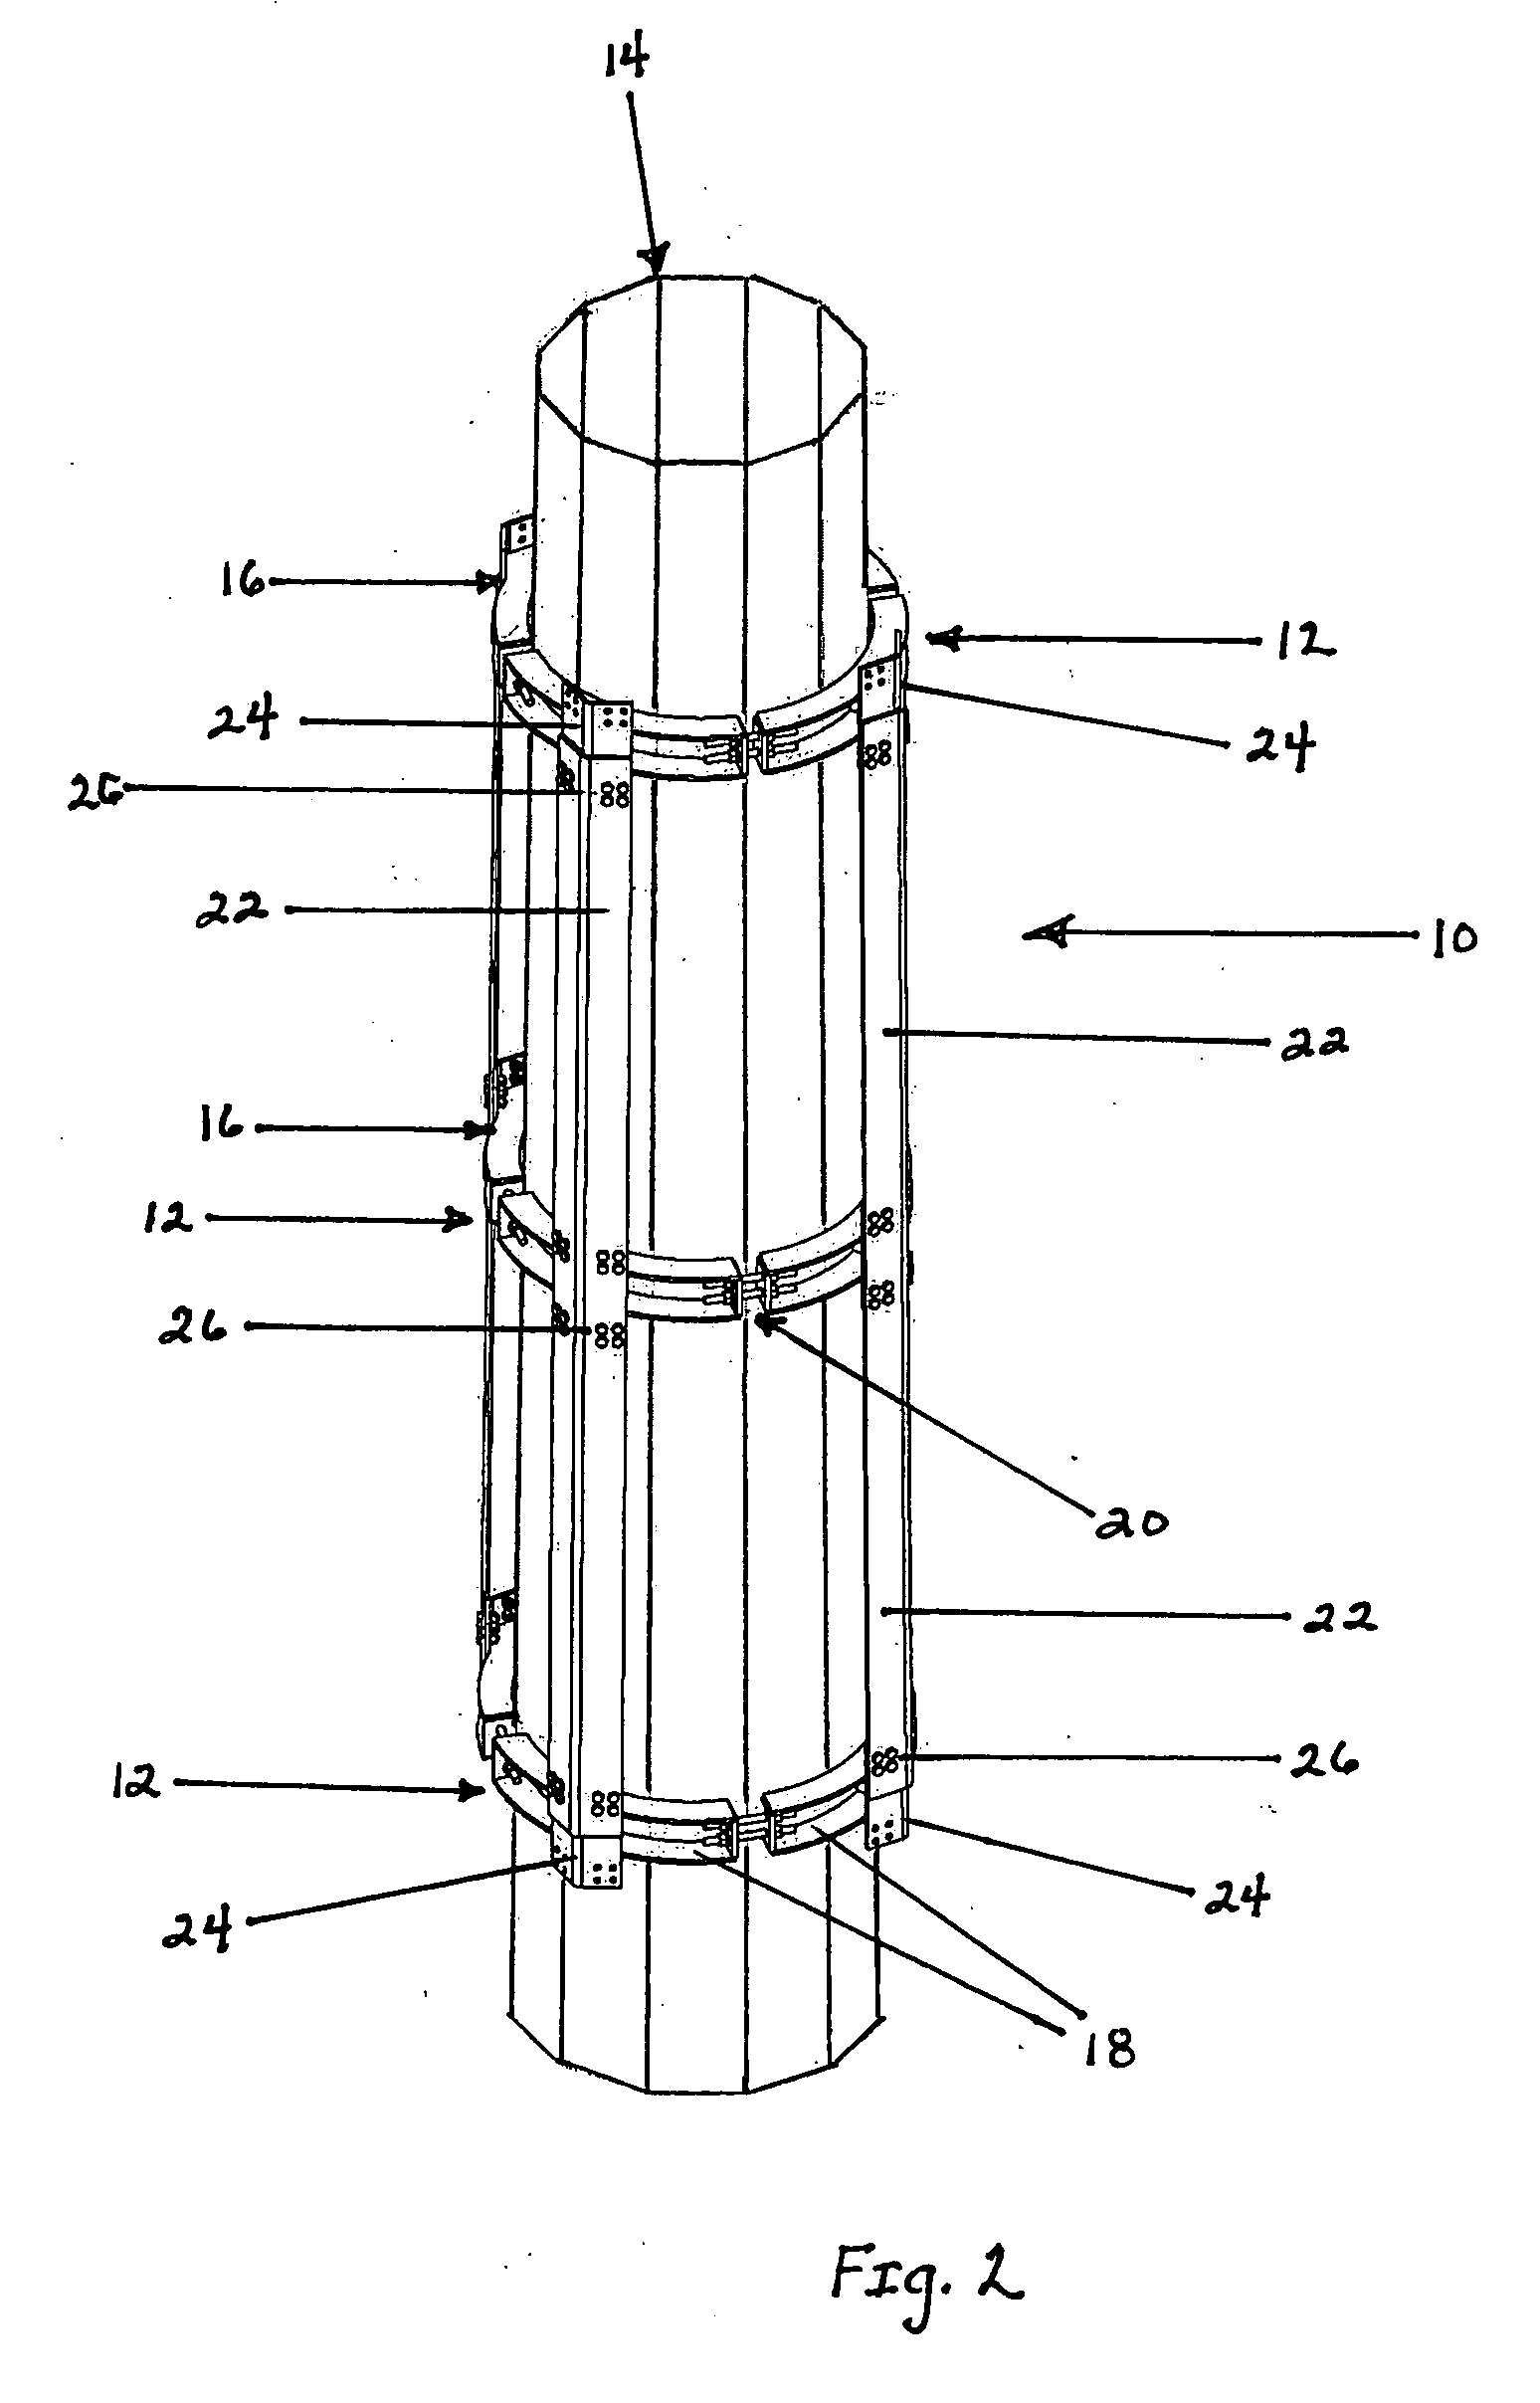 Structural reinforcement member and method of utilizing the same to reinforce a longitudinal section of an antenna support tower